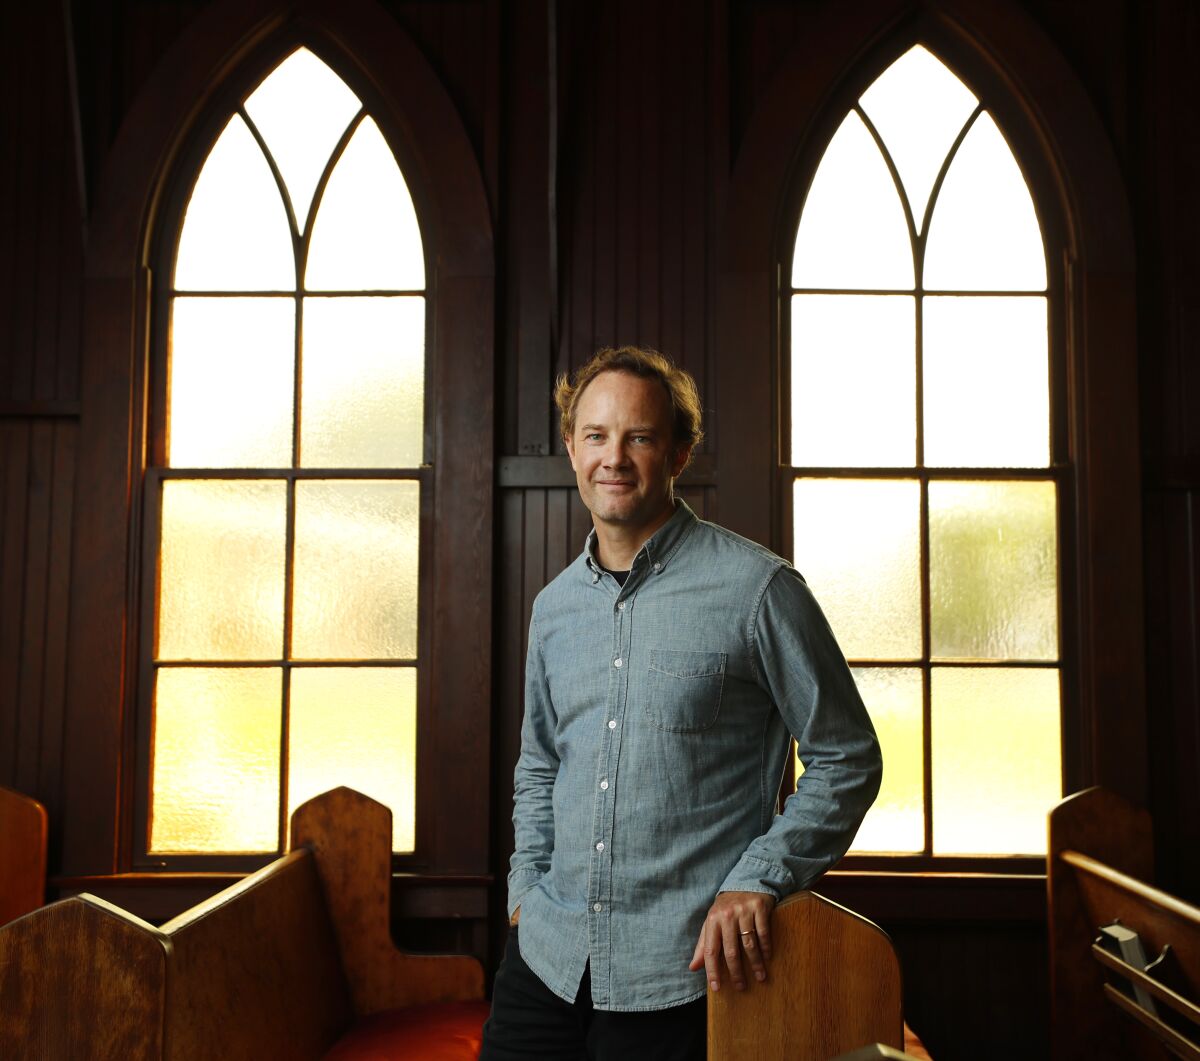 Matt McBane, a native of Carlsbad, is the artistic director of the Carlsbad Music Festival